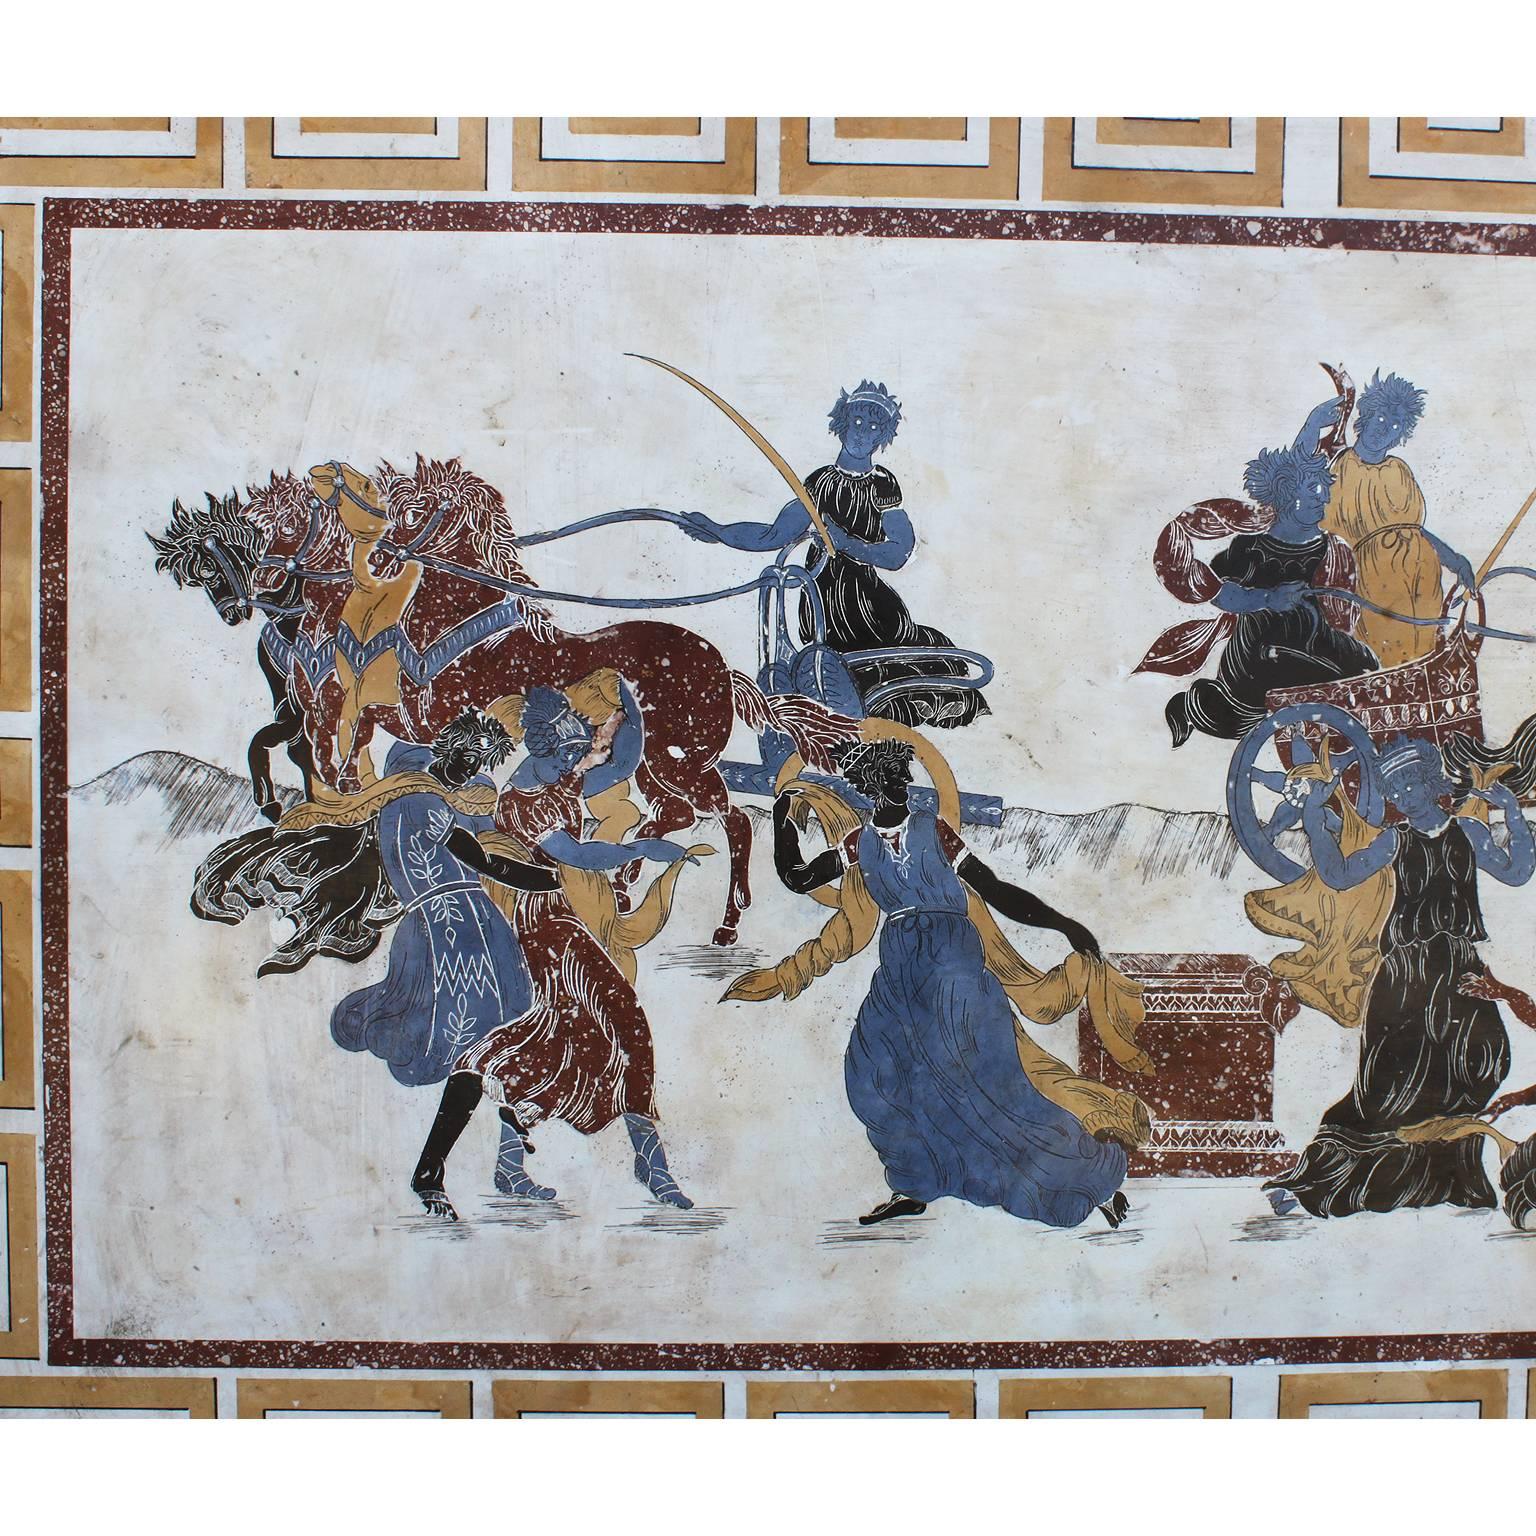 A large Italian 19th-20th century neoclassical and Greco-Roman style architectural Scagliola wall plaque depicting chariots, horses, allegorical maidens and gods, inlaid and painted in Imperial porphyry, sienna and other colorful stones and